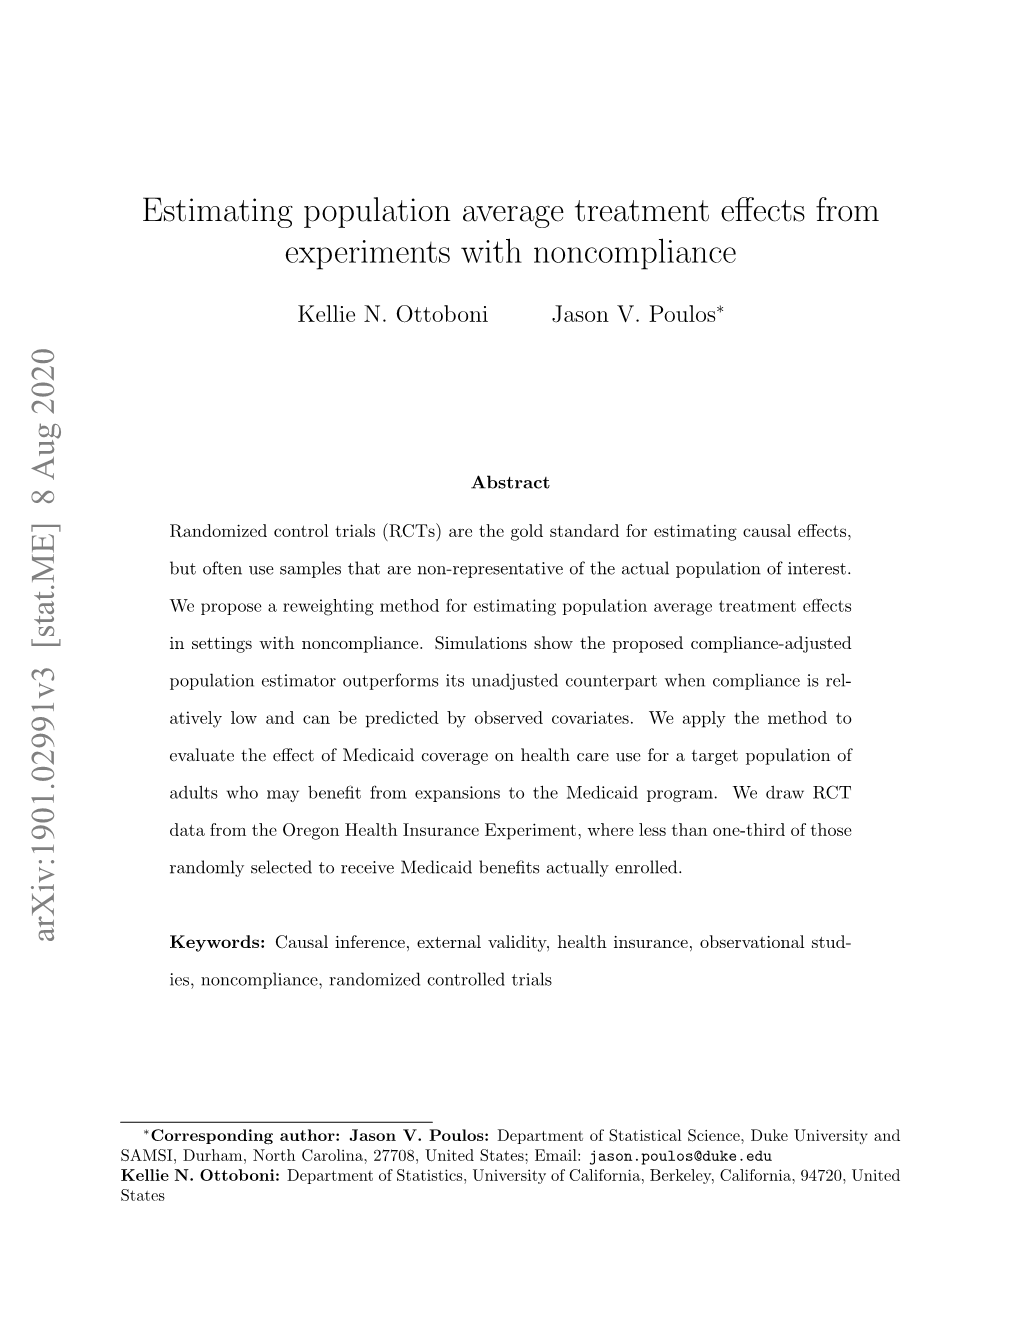 Estimating Population Average Treatment Effects from Experiments